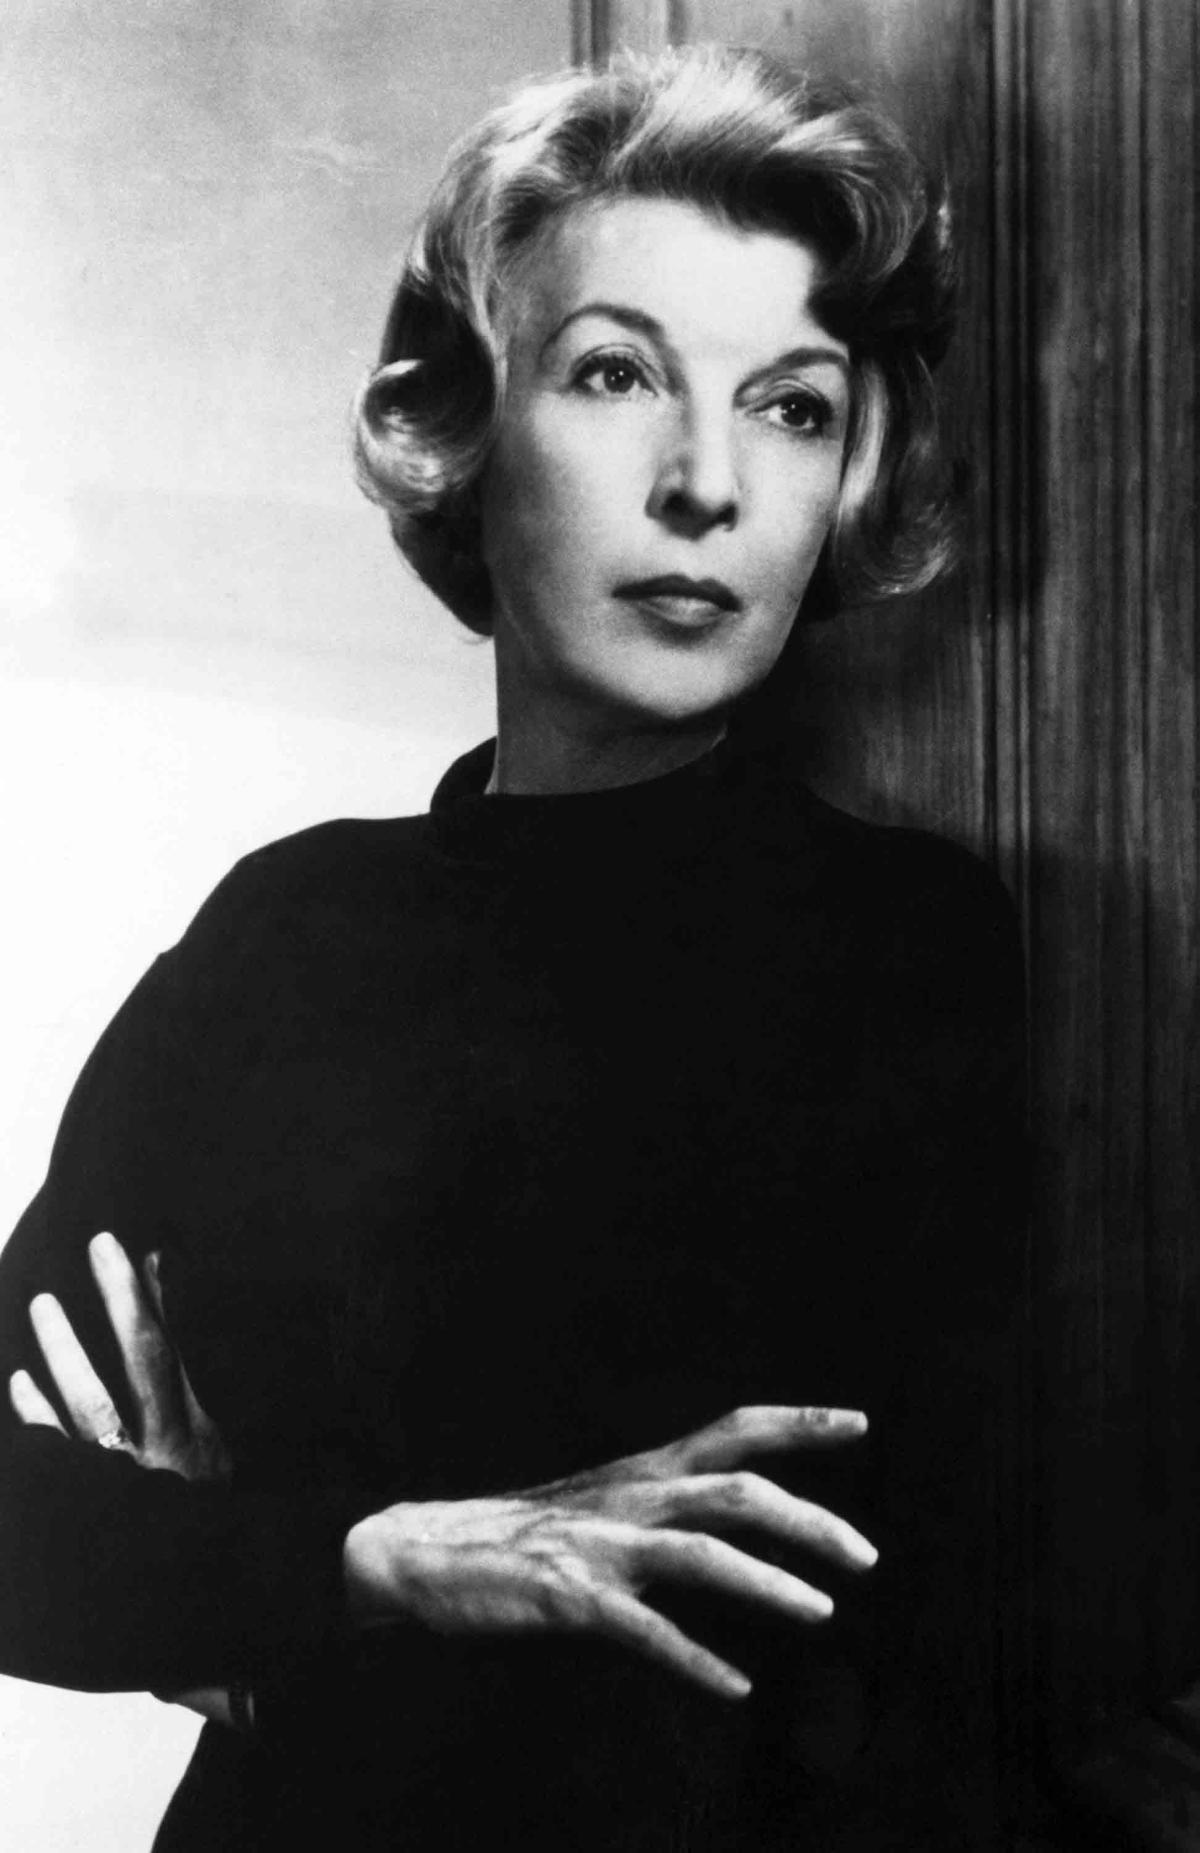 Gellhorn, later in life, in her London flat.